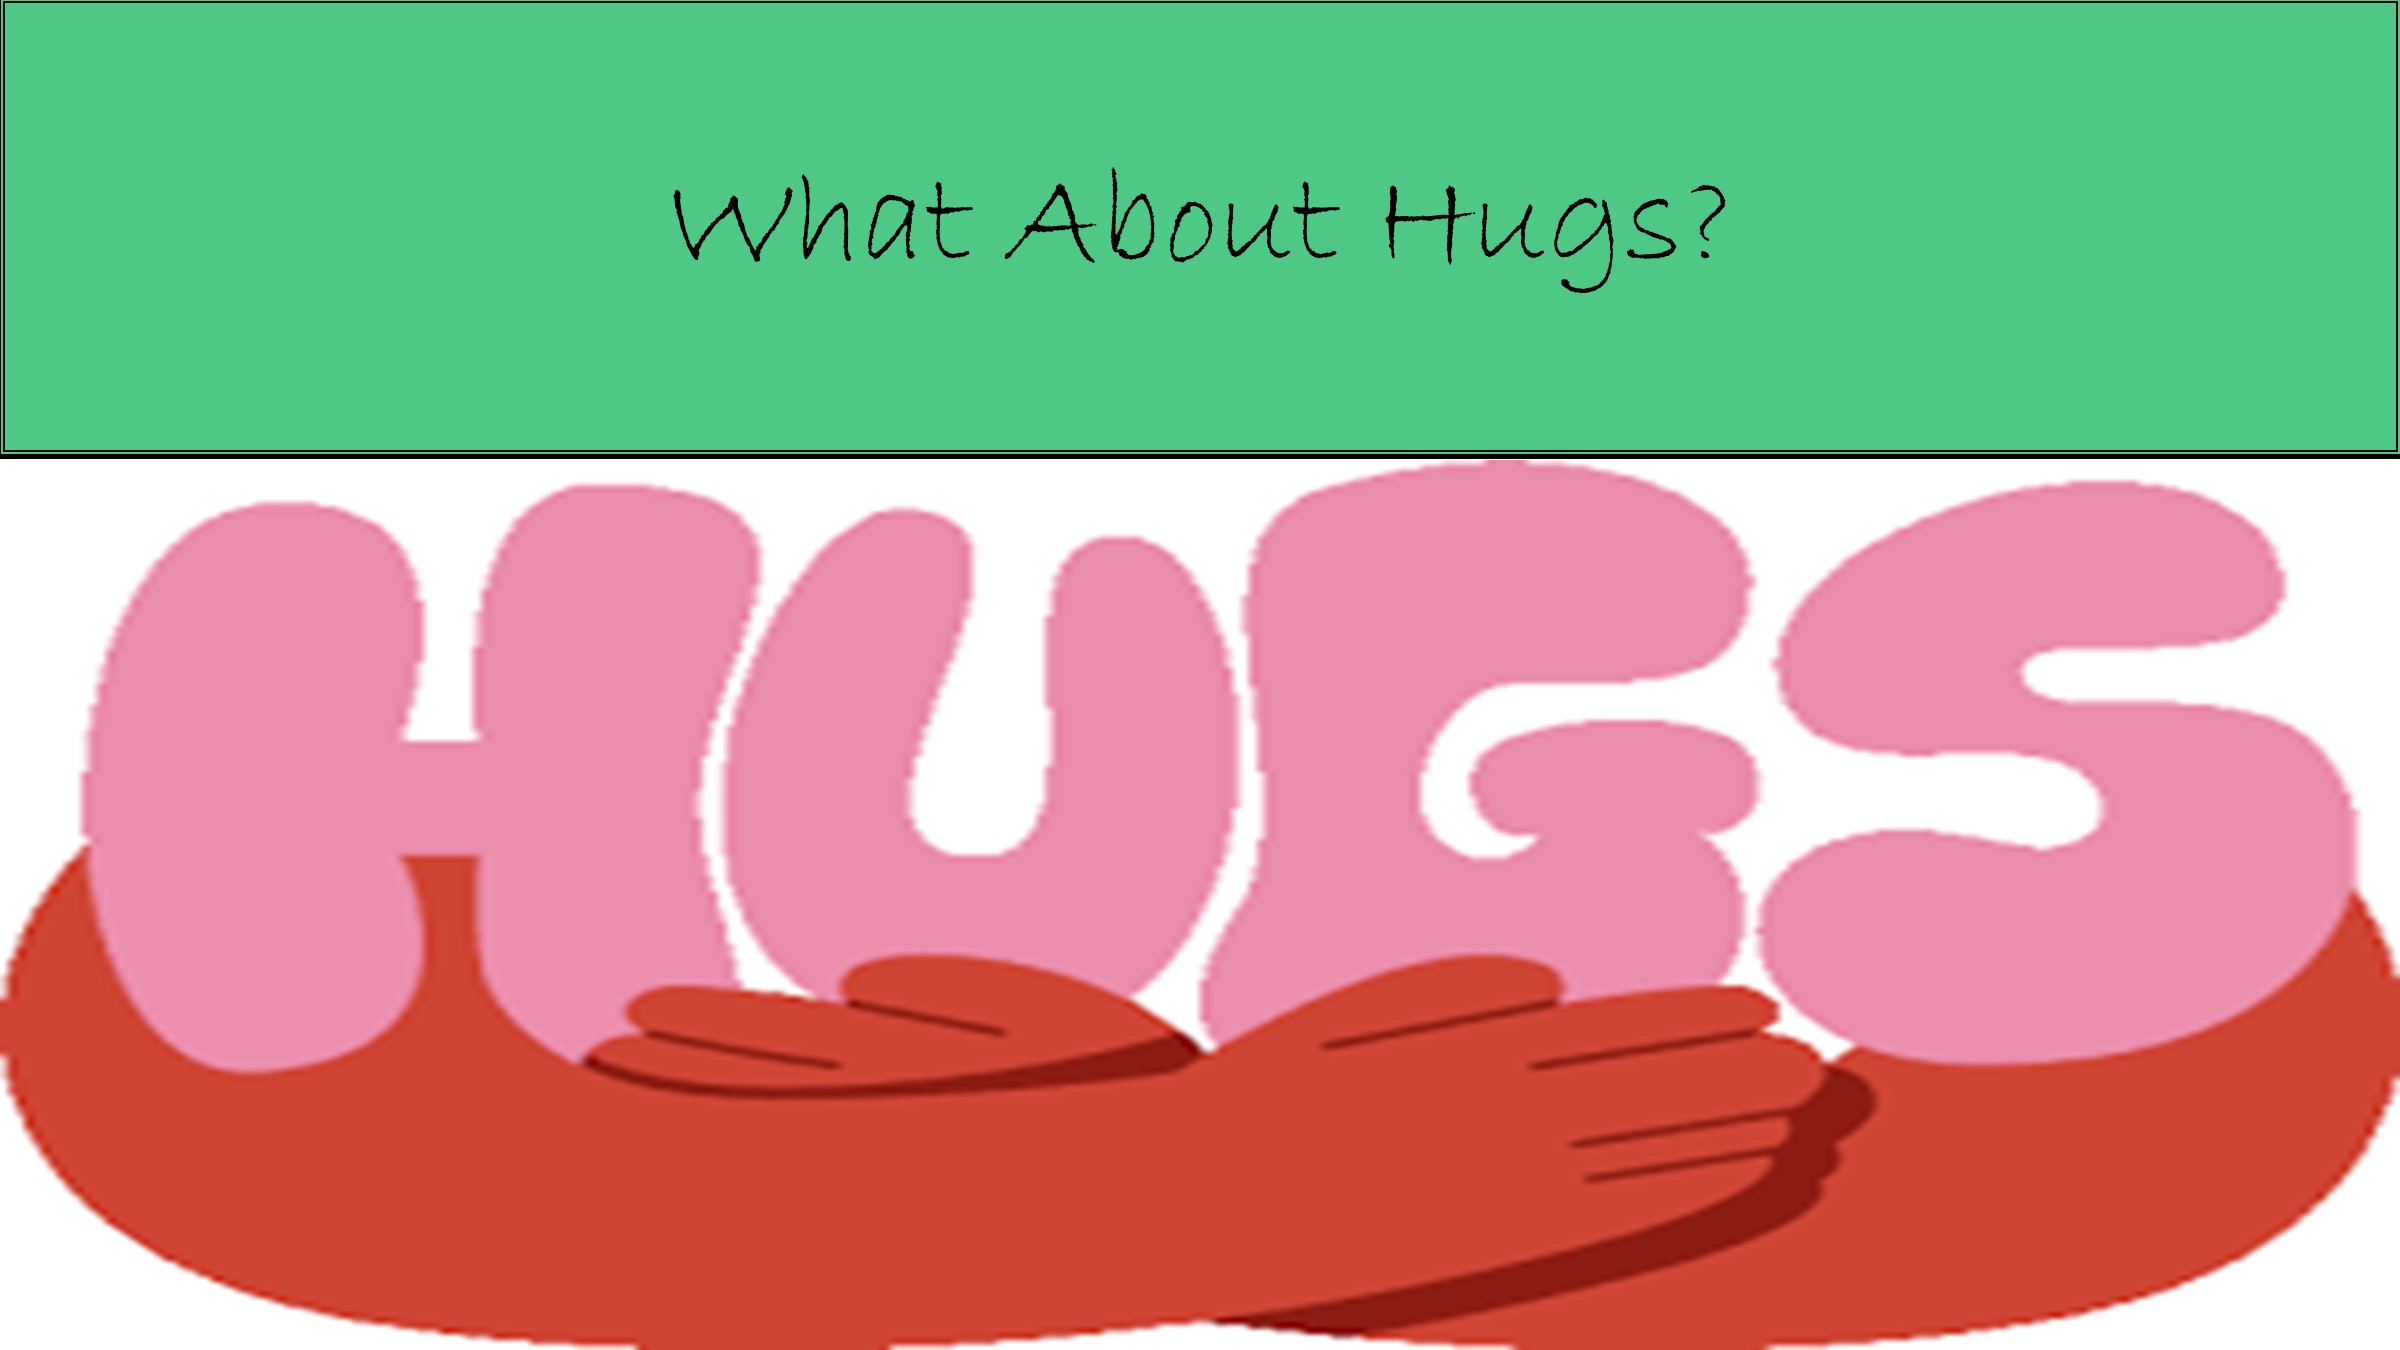 What About Hugs? (thank you, Heart!)